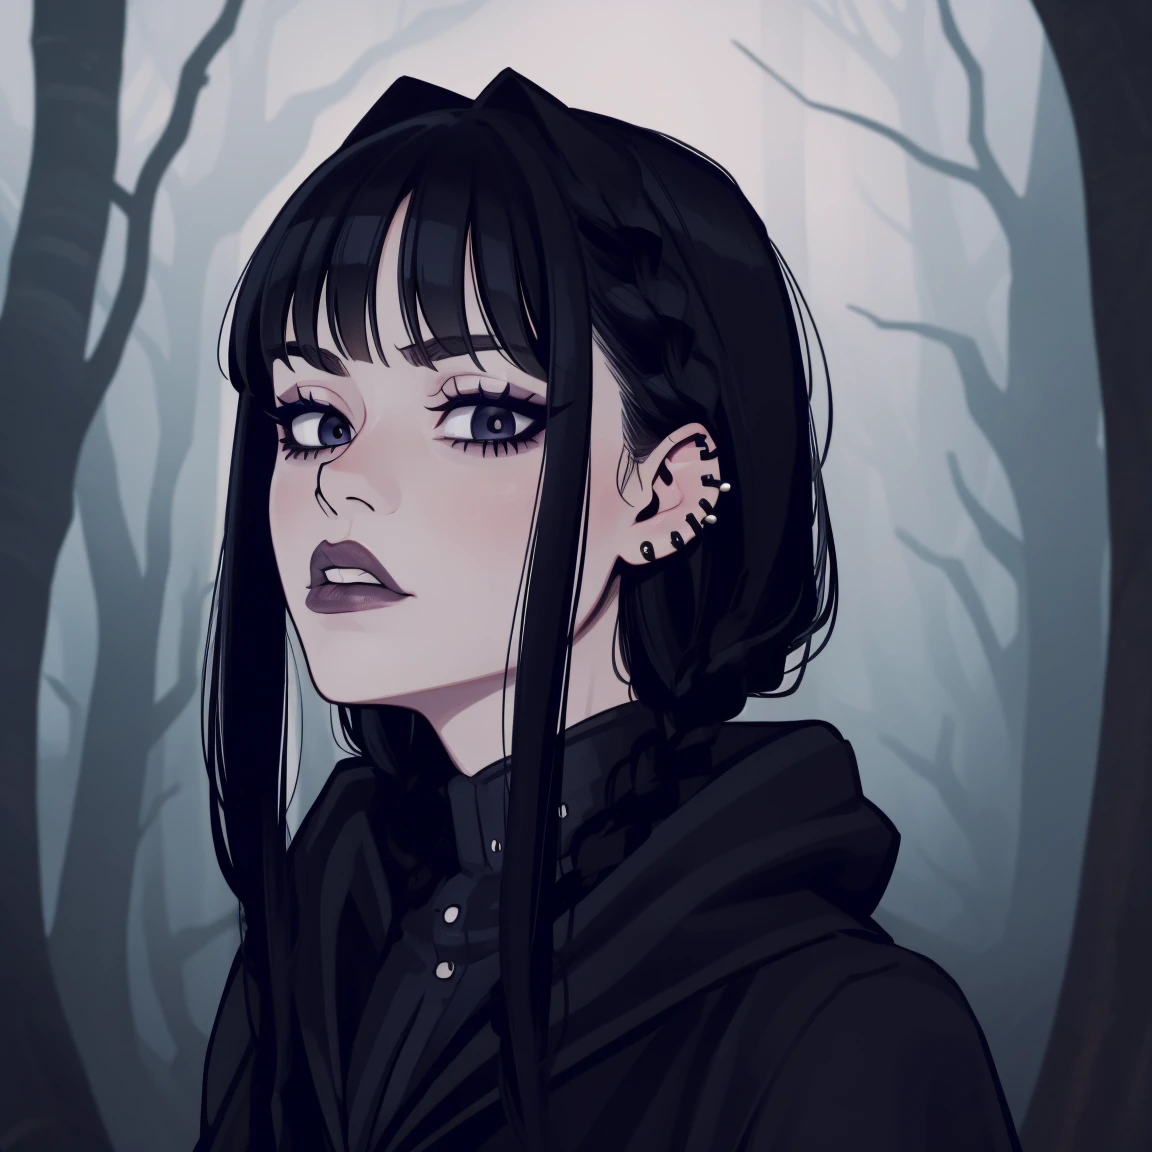 Wednesday addams, teen titans, hooded, goth girl, autumn forest background, detailed, detailed, detailed, beautiful, detail, goth girl, masterpiece, dark night background, gothic, goth, goth, detailed, goth girl, piercings, detailed face, looking viewer, Wednesday addams, (Dark eye shadow) dark eye shadow, black eye shadow,